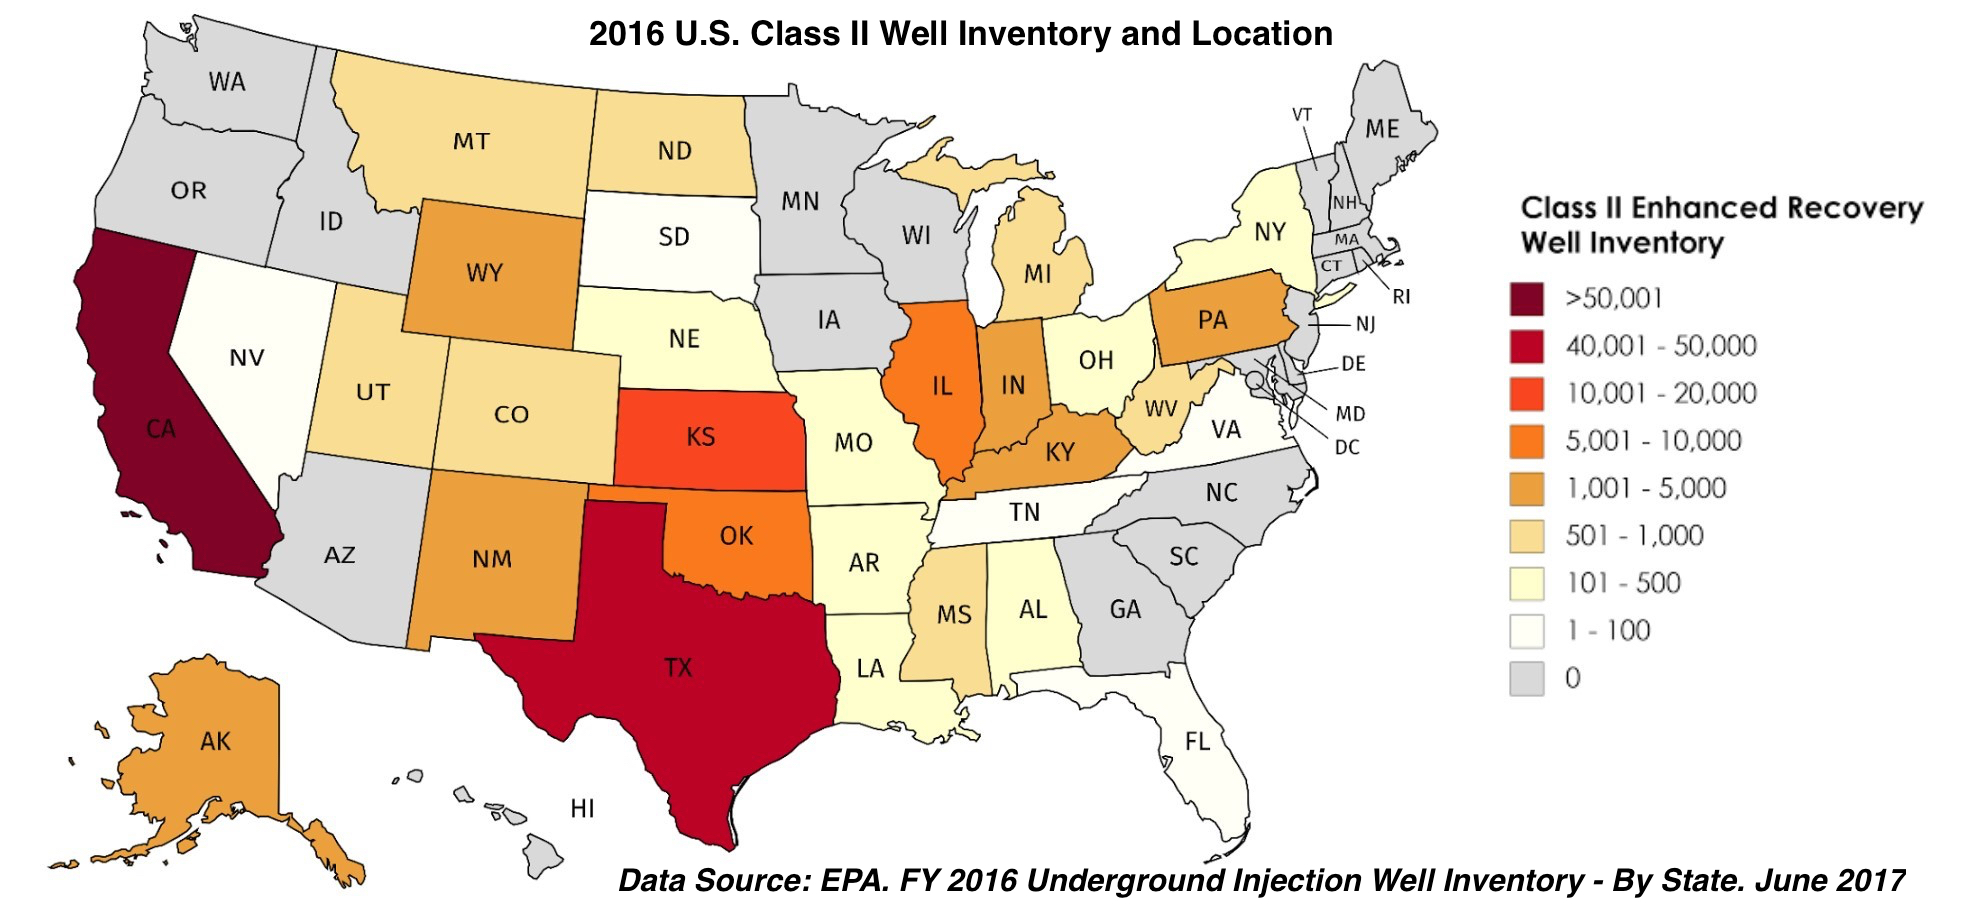 2016 U.S. Class II Well Inventory and Location